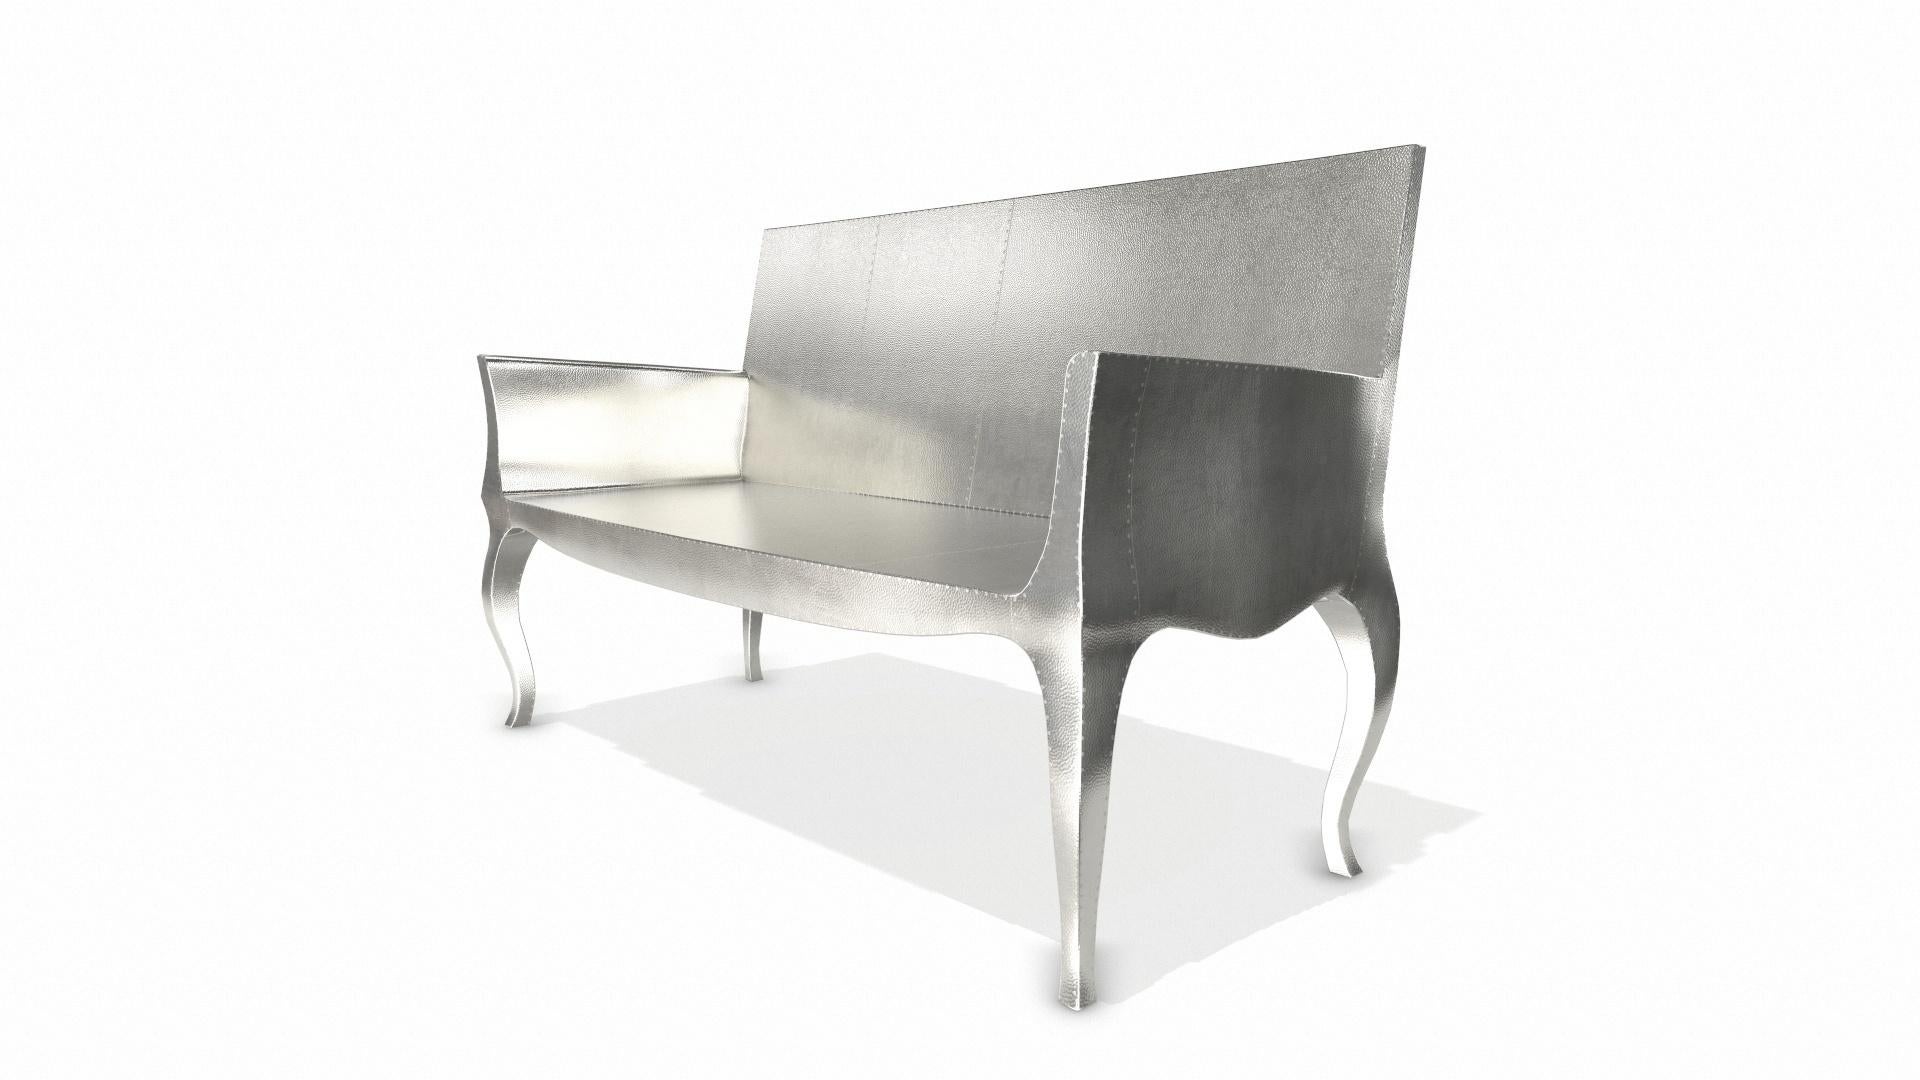 Woodwork Louise Settee Art Deco Loveseats in Mid. Hammered White Bronze by Paul Mathieu  For Sale